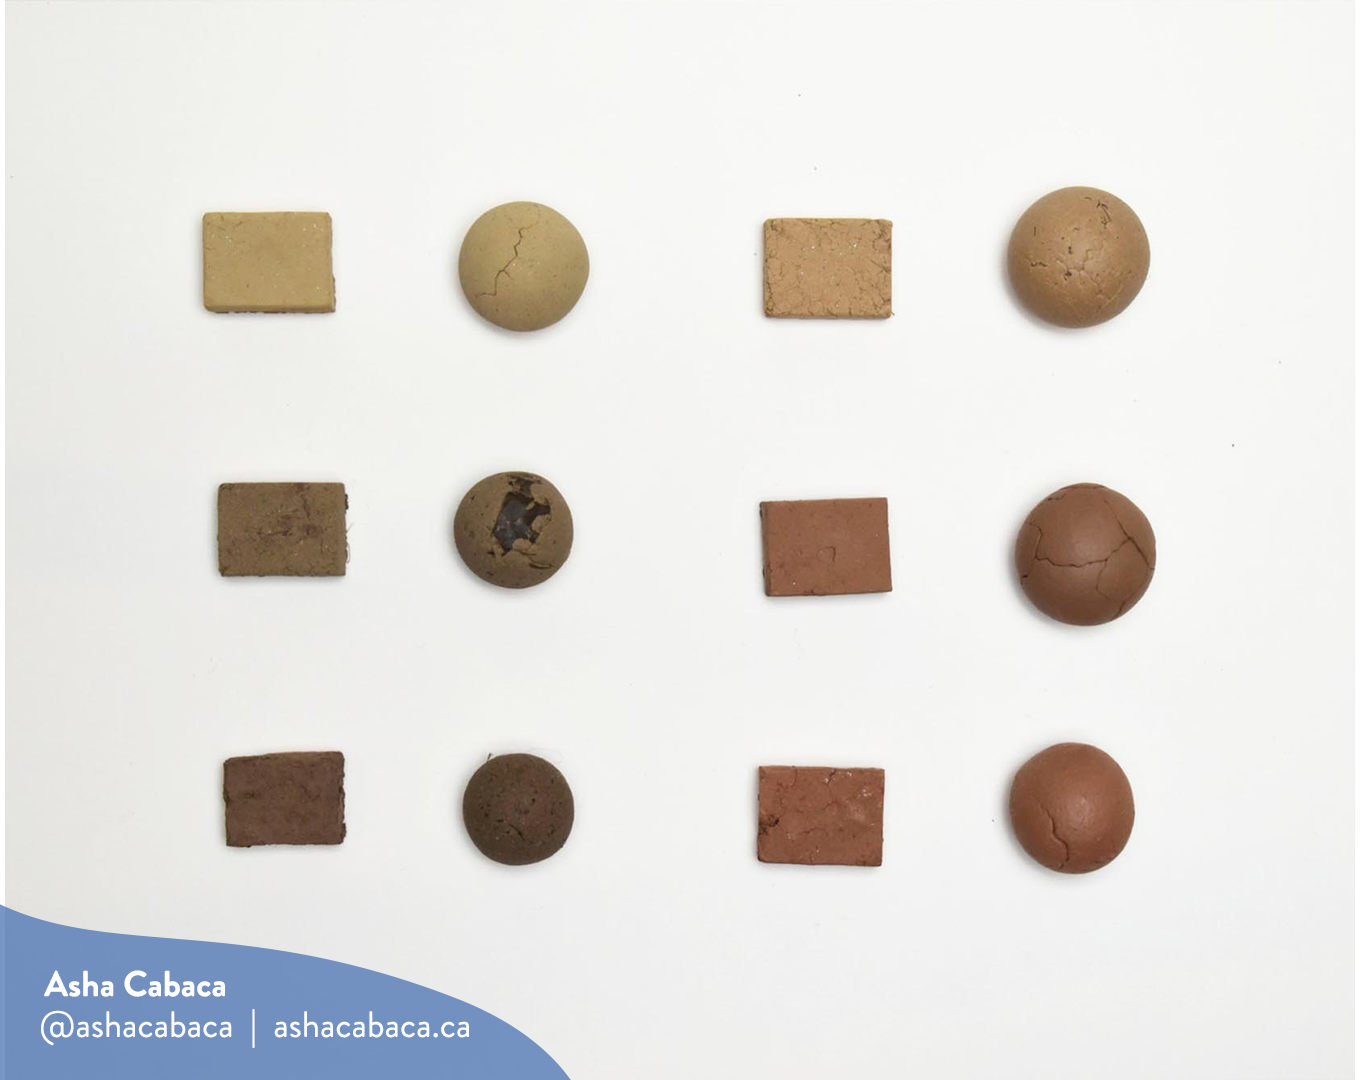 Horizontal photo of artwork by Asha Cabaca, it features six kinds of mud rolled into a sphere and into rectangles on a white surface. There is a watermark in blue that has Asha’s name, Instagram handle (@ashacabaca) and website (ashacabaca.ca).